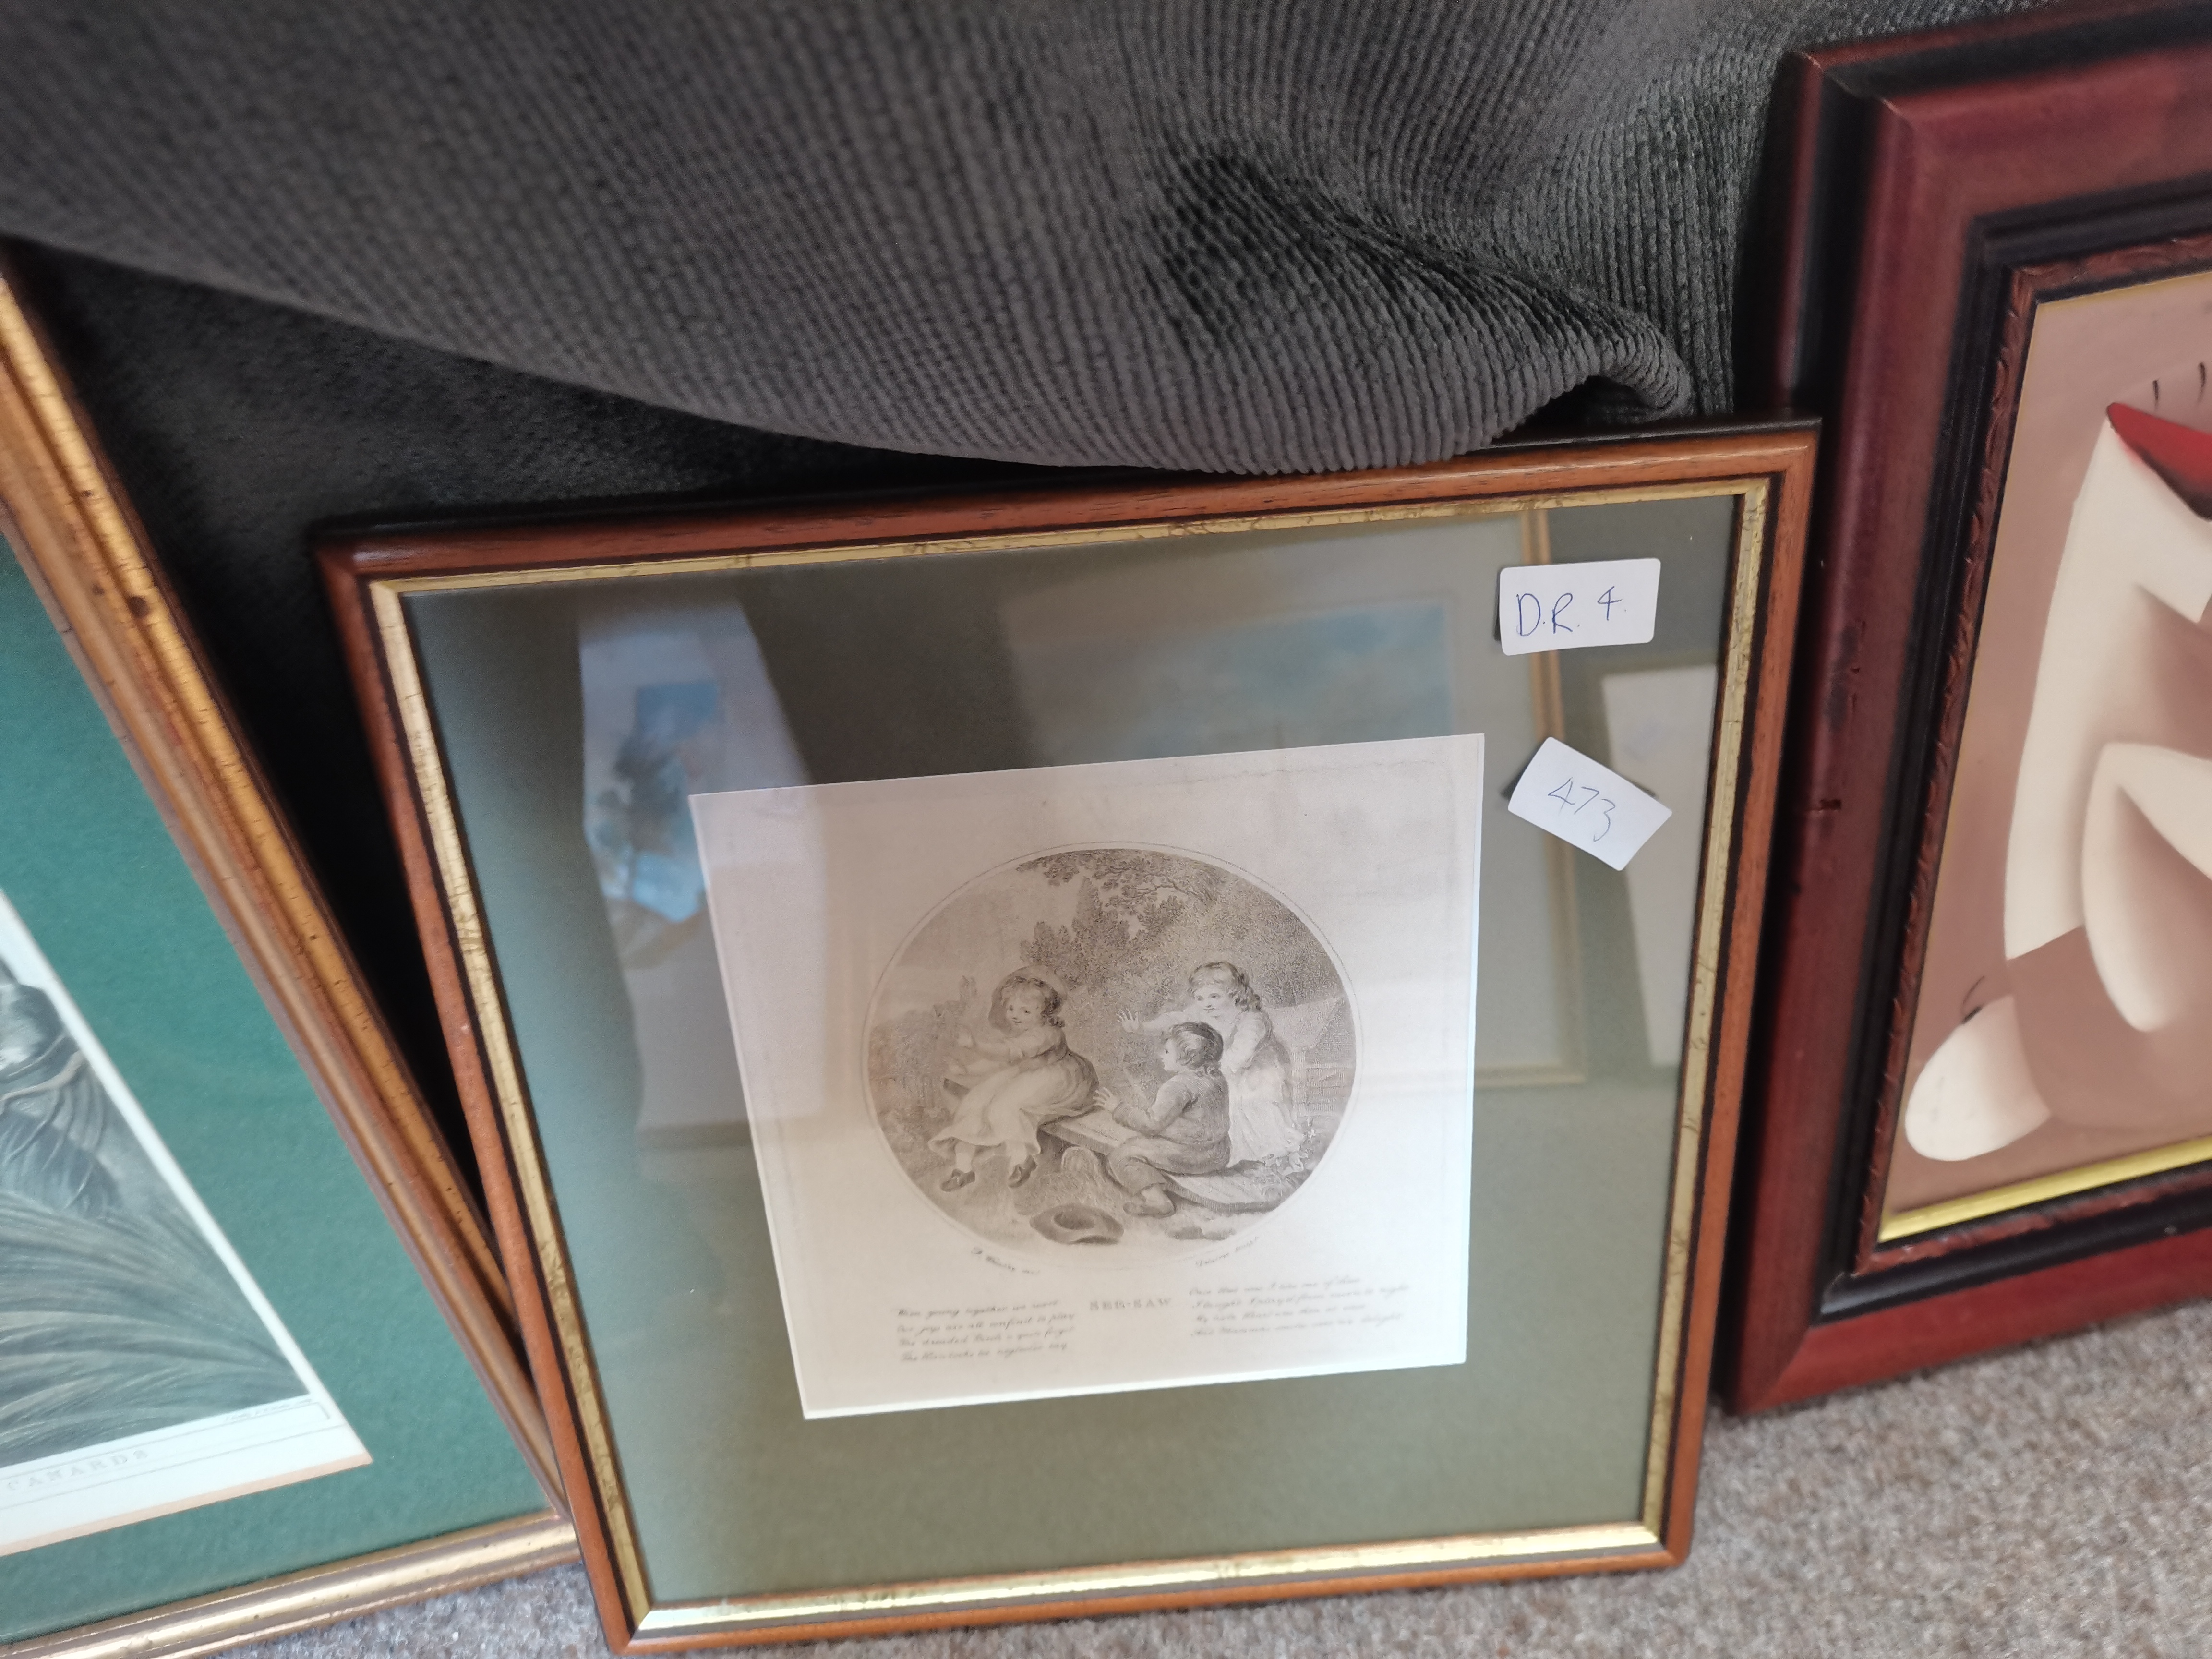 Framed engraving "Seesaw" 1795 plus 1960's oil on canvas by Joseph Cantave and framed print "Duck - Image 3 of 4